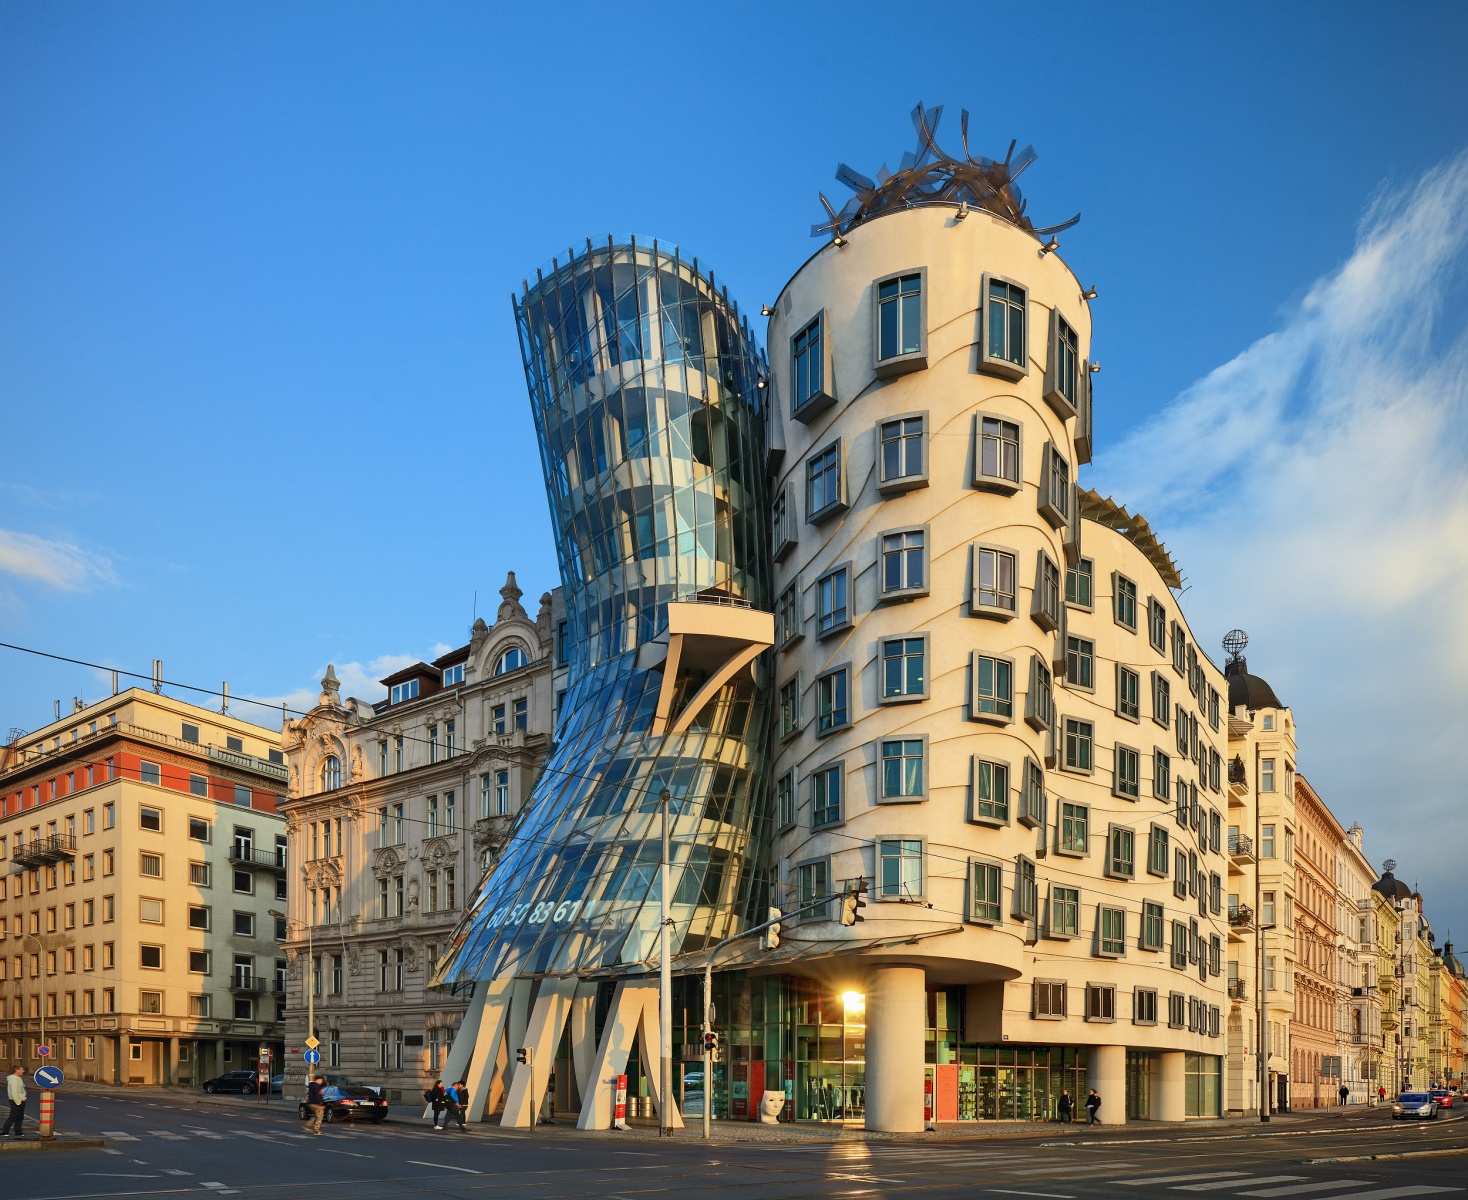 15 Incredible Must-See Buildings in Your Lifetime